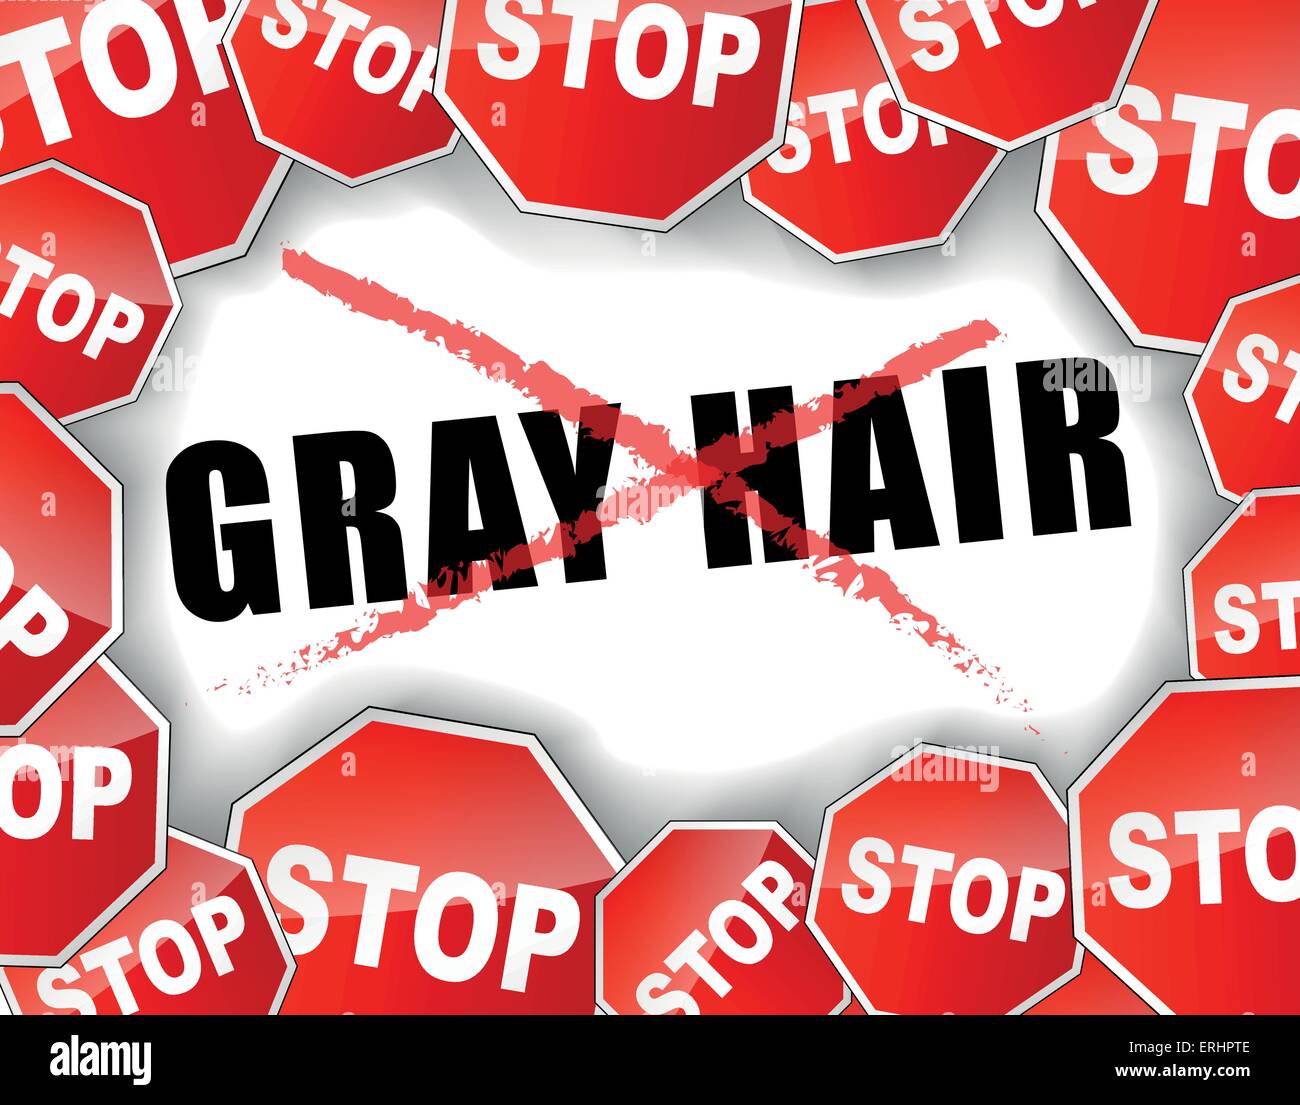 Vector illustration of stop gray hair concept background Stock Vector